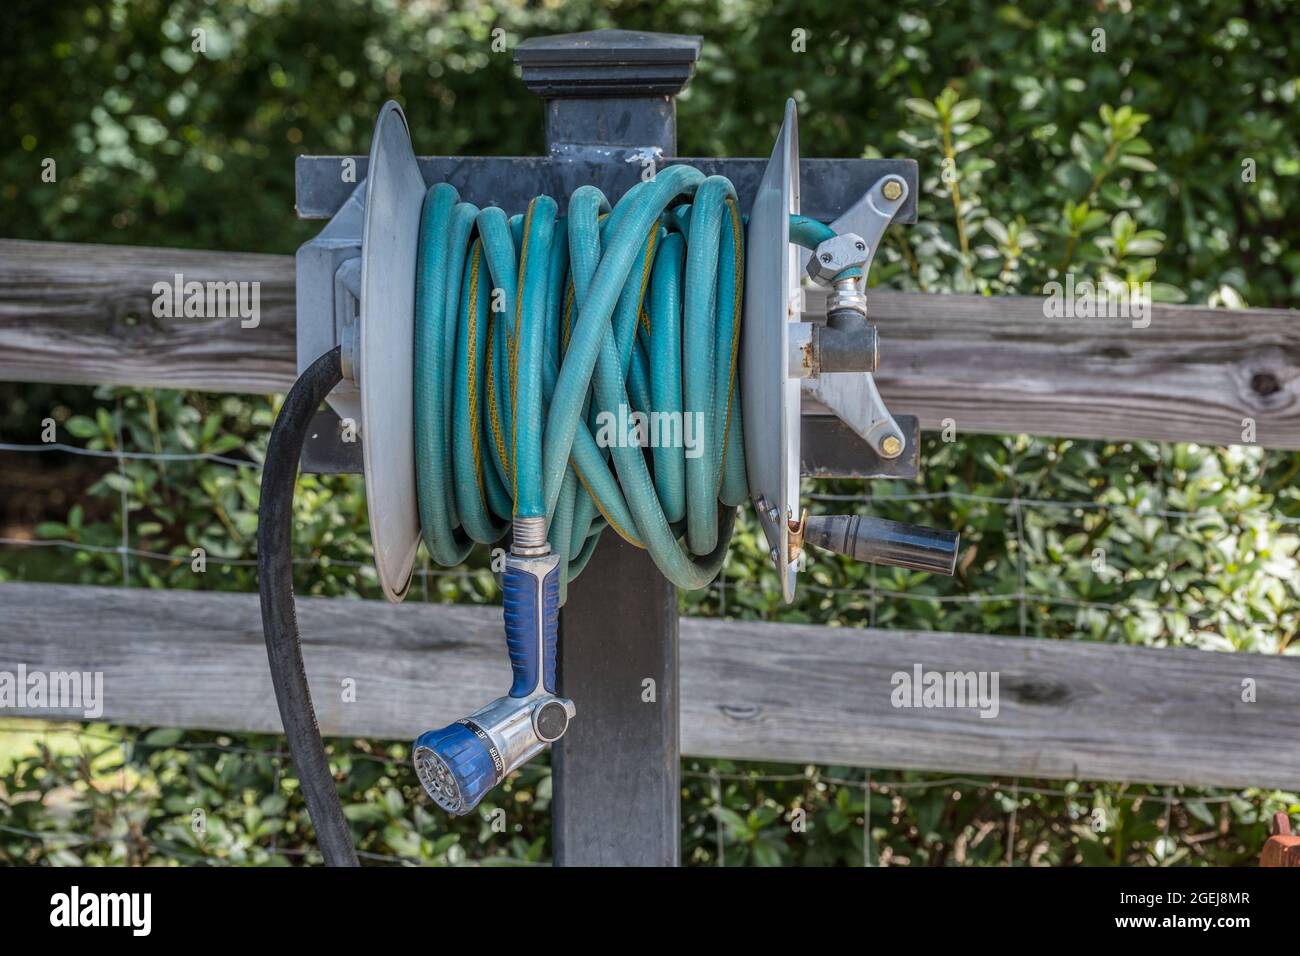 Heavy duty gardening hose with a hand sprayer attached coiled up on a metal  reel that